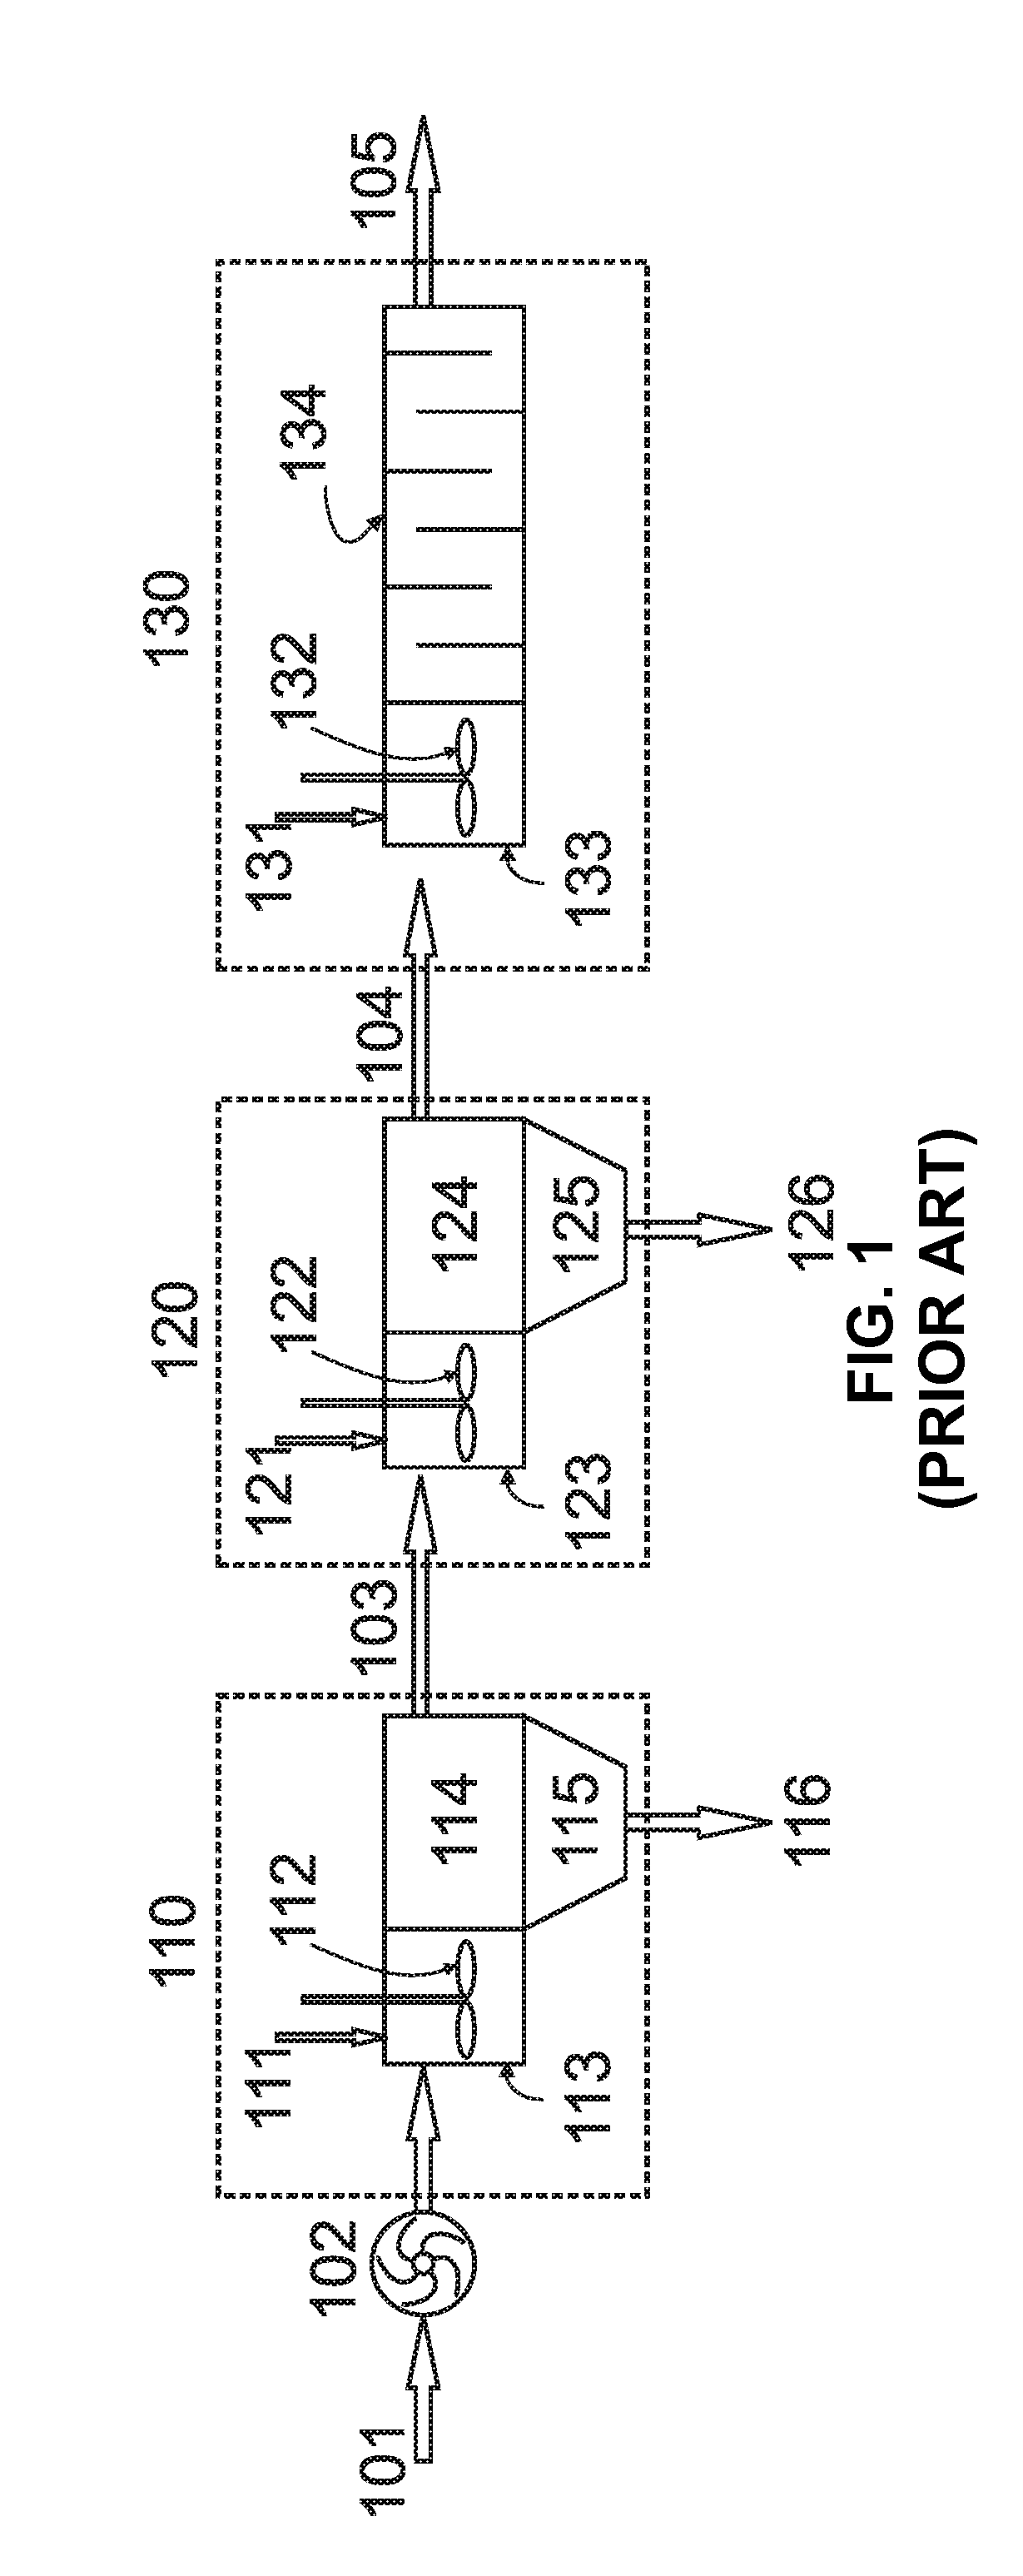 Method and system for treating a contaminated fluid